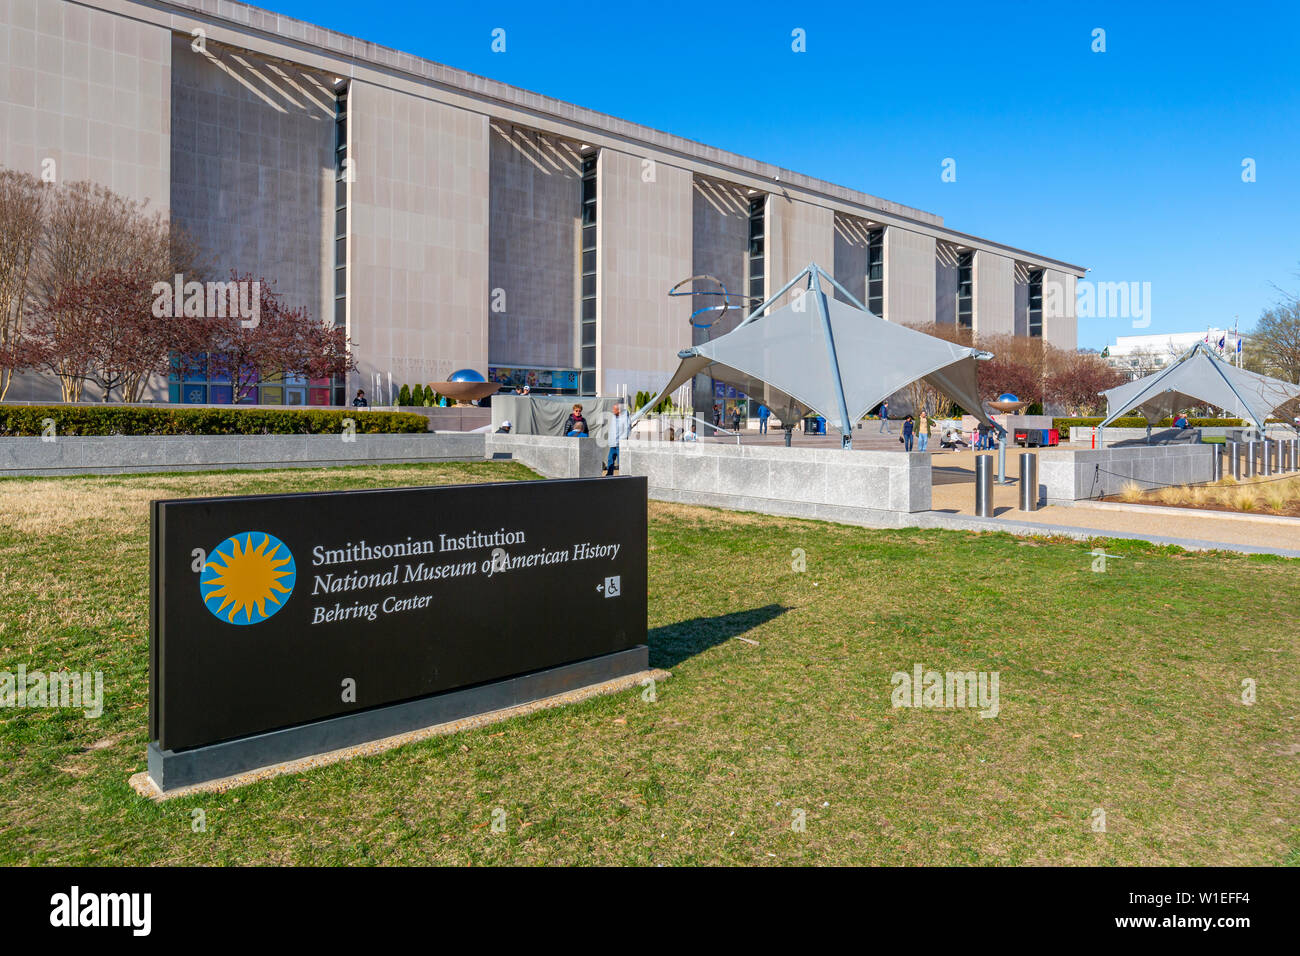 The National Museum of American History in spring, Washington D.C., United States of America, North America Stock Photo